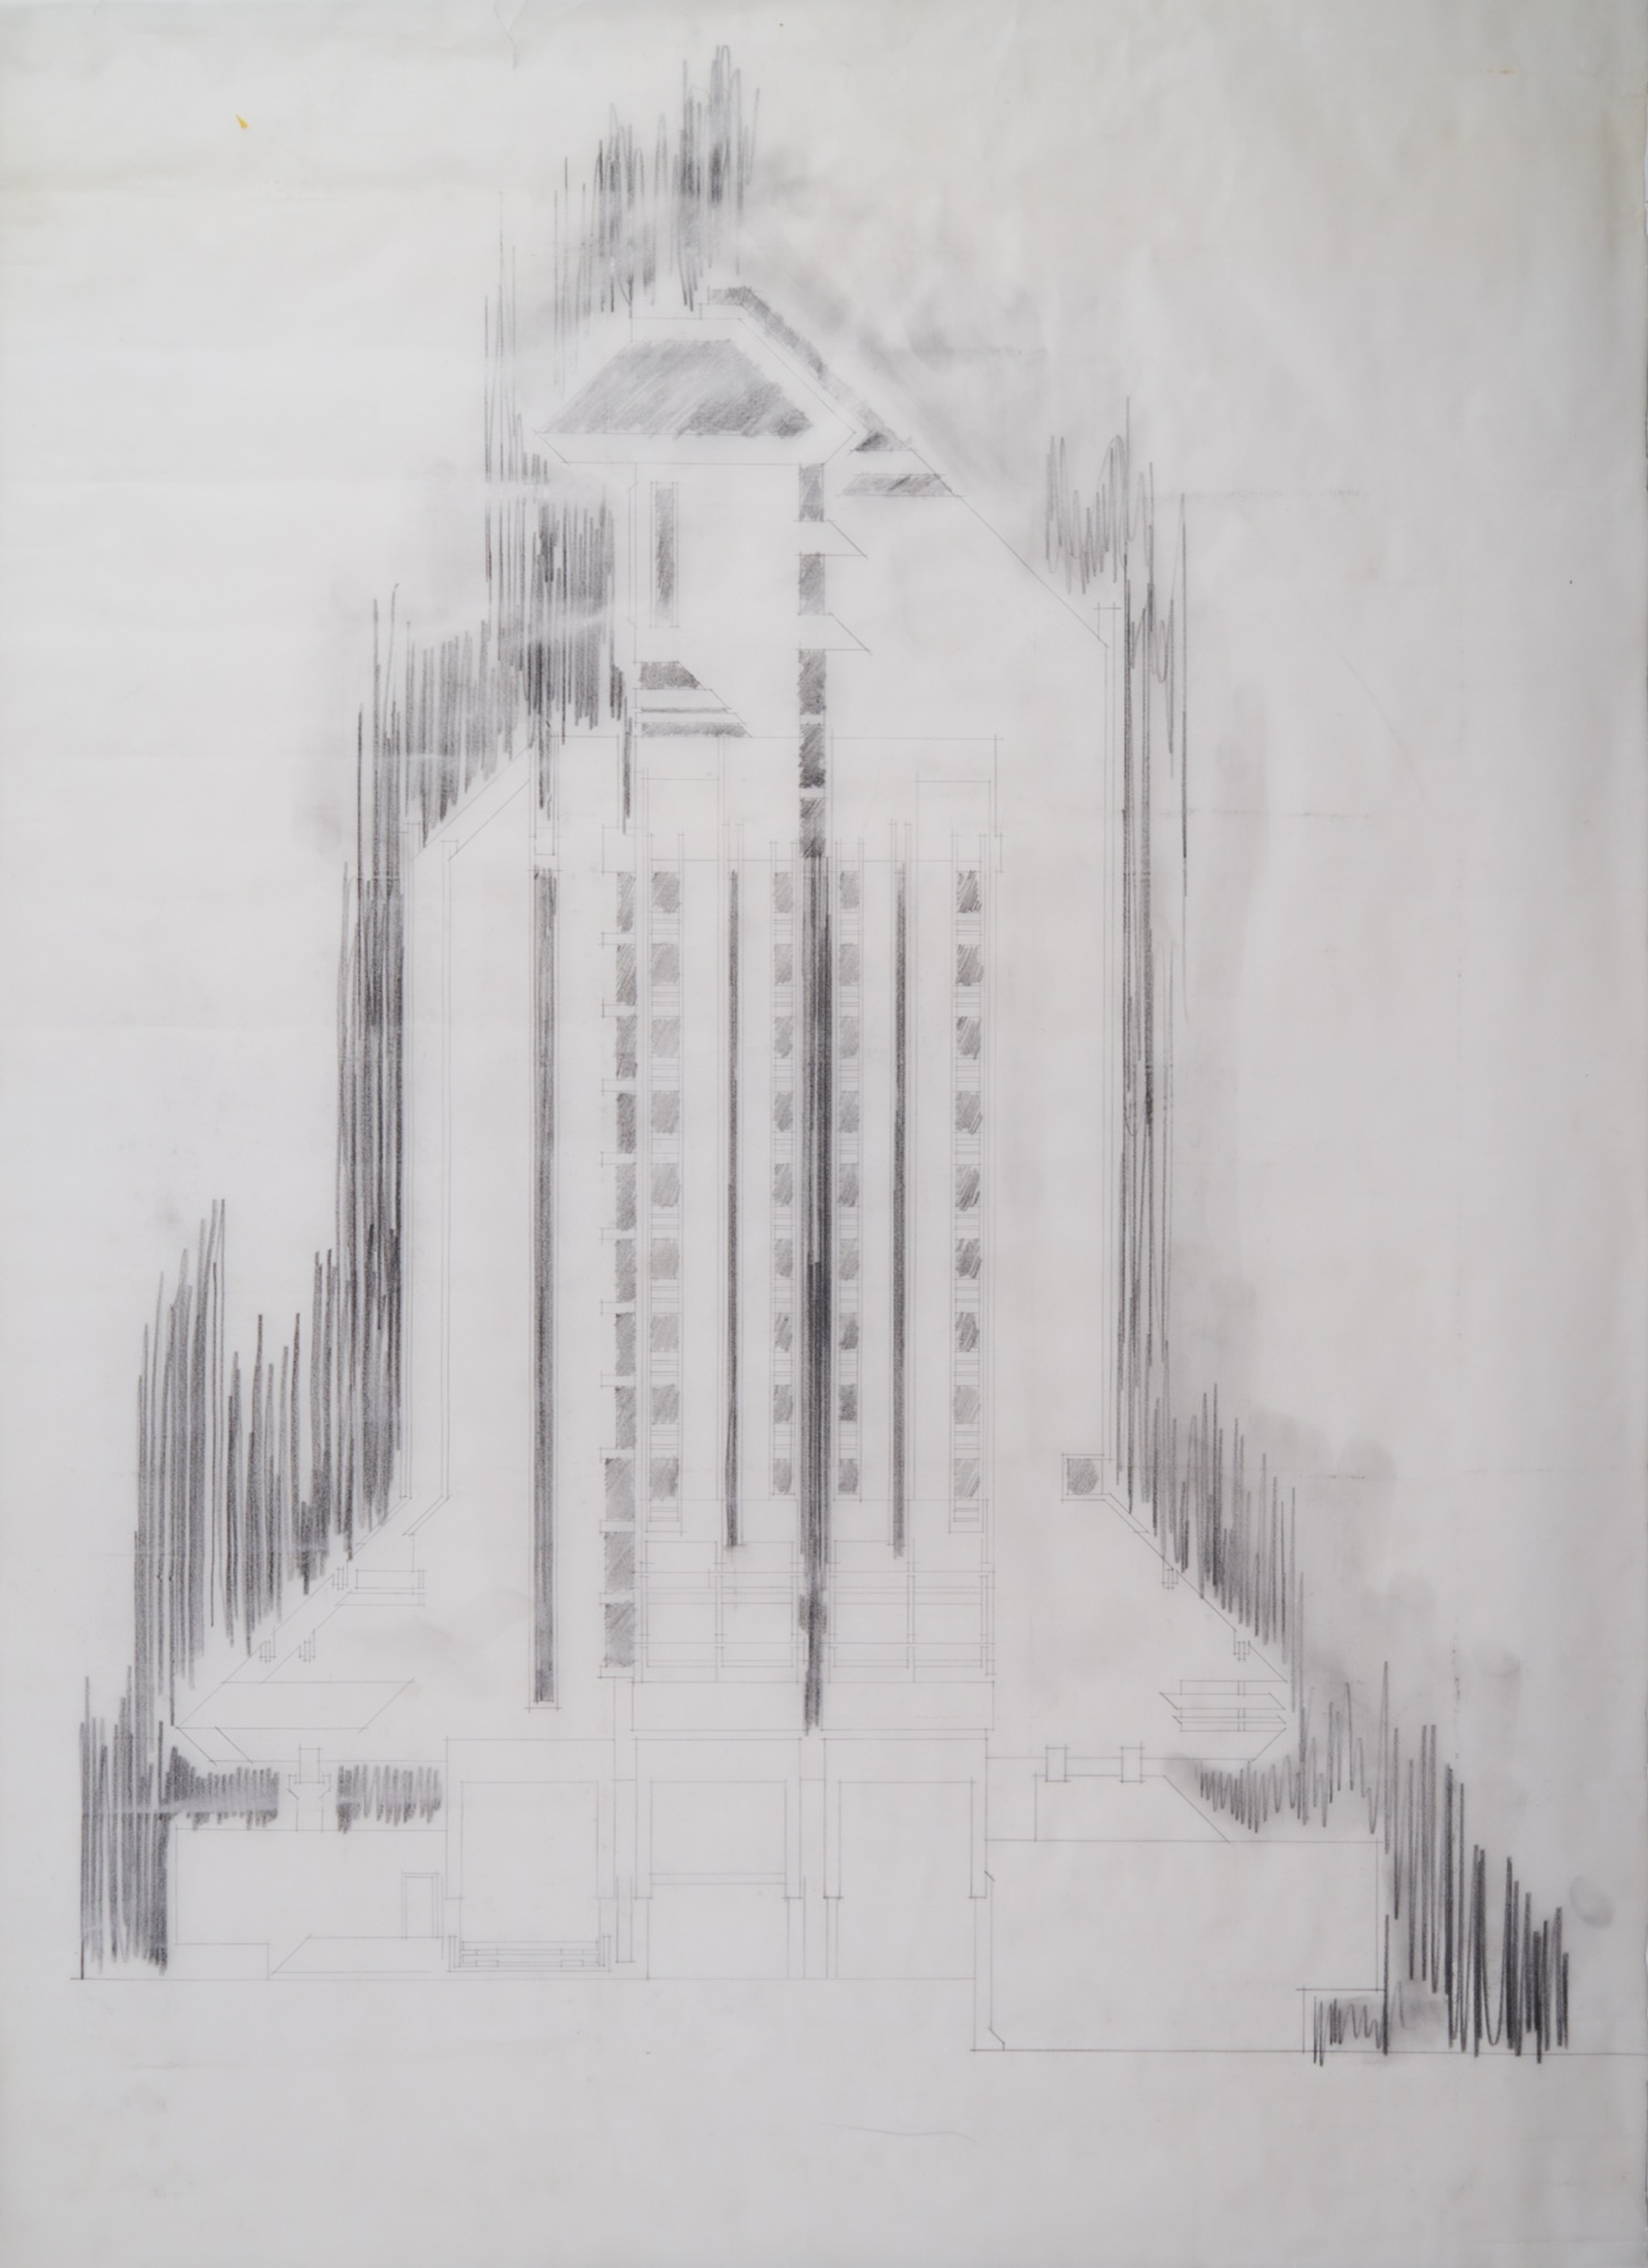 Architectural drawing, Hotel Zlatibor. 

Courtesy of the APSS Institute